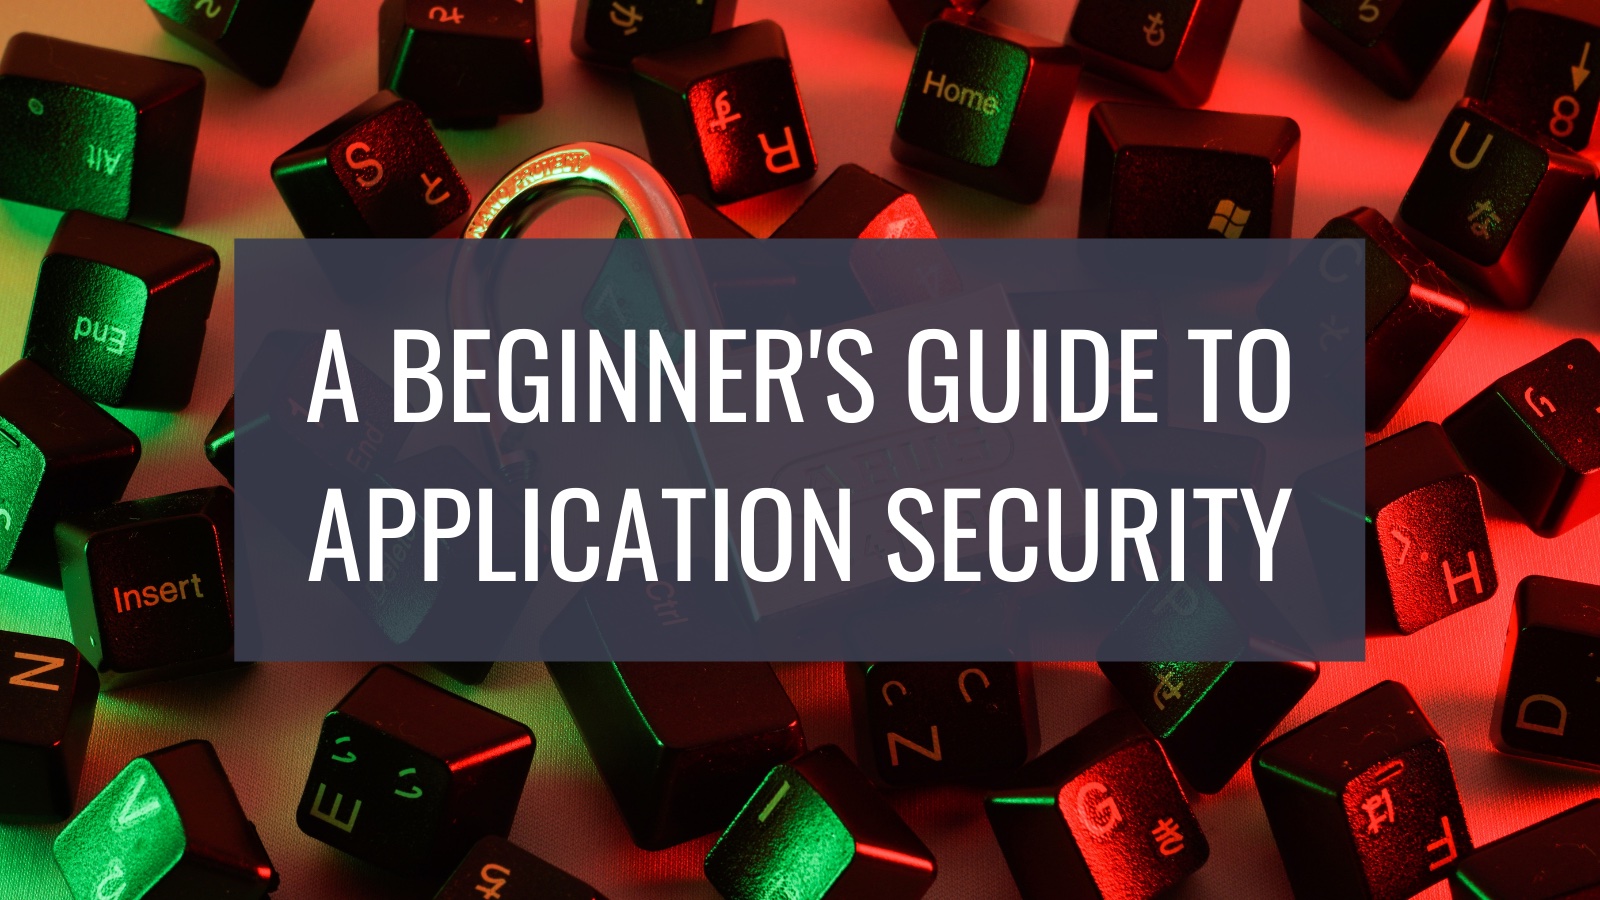 A Beginner's Guide to Application Security